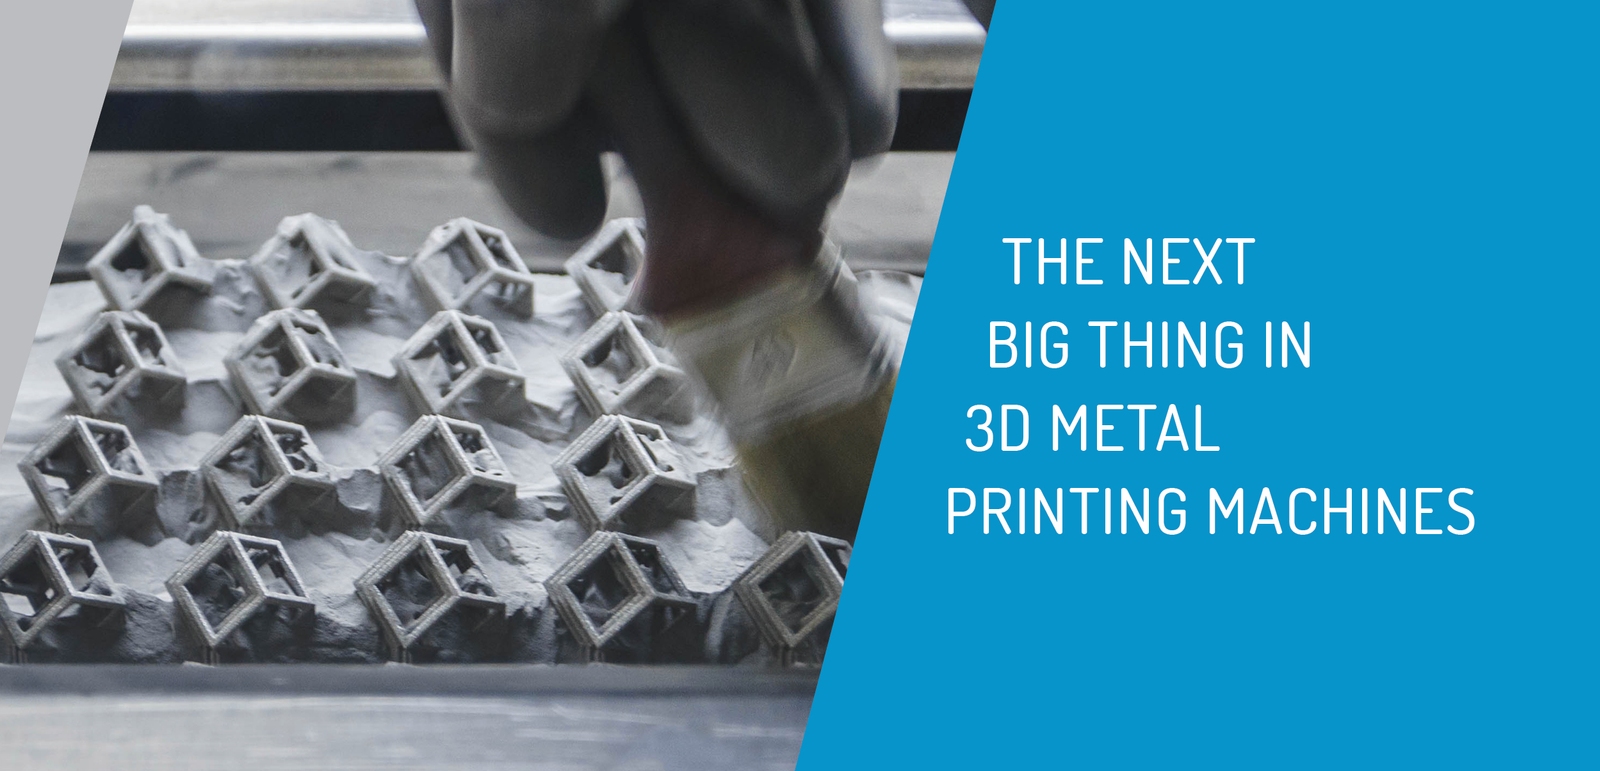 The Next Big Thing in 3D Metal Printing